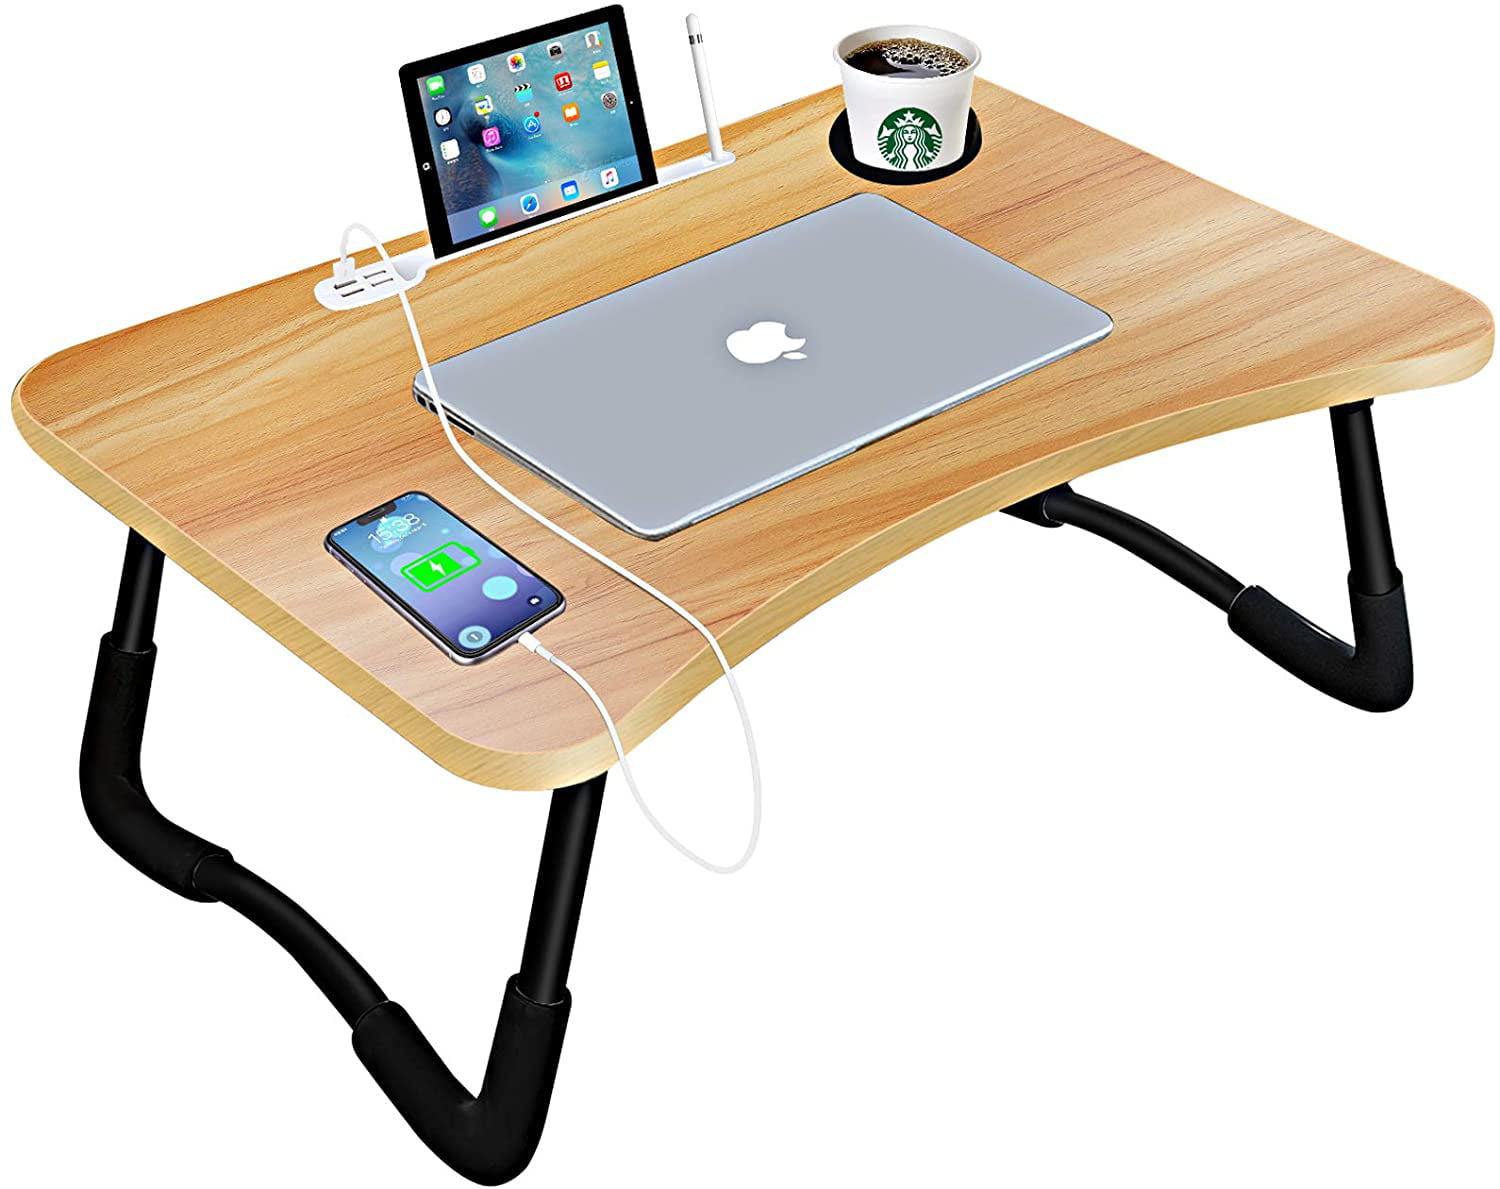 HLHome Laptop Bed Desk,Portable Foldable Laptop Bed Tray Table with USB Charge Port/Cup Holder/Storage Drawer,for Bed /Couch /Sofa Working Black Reading 